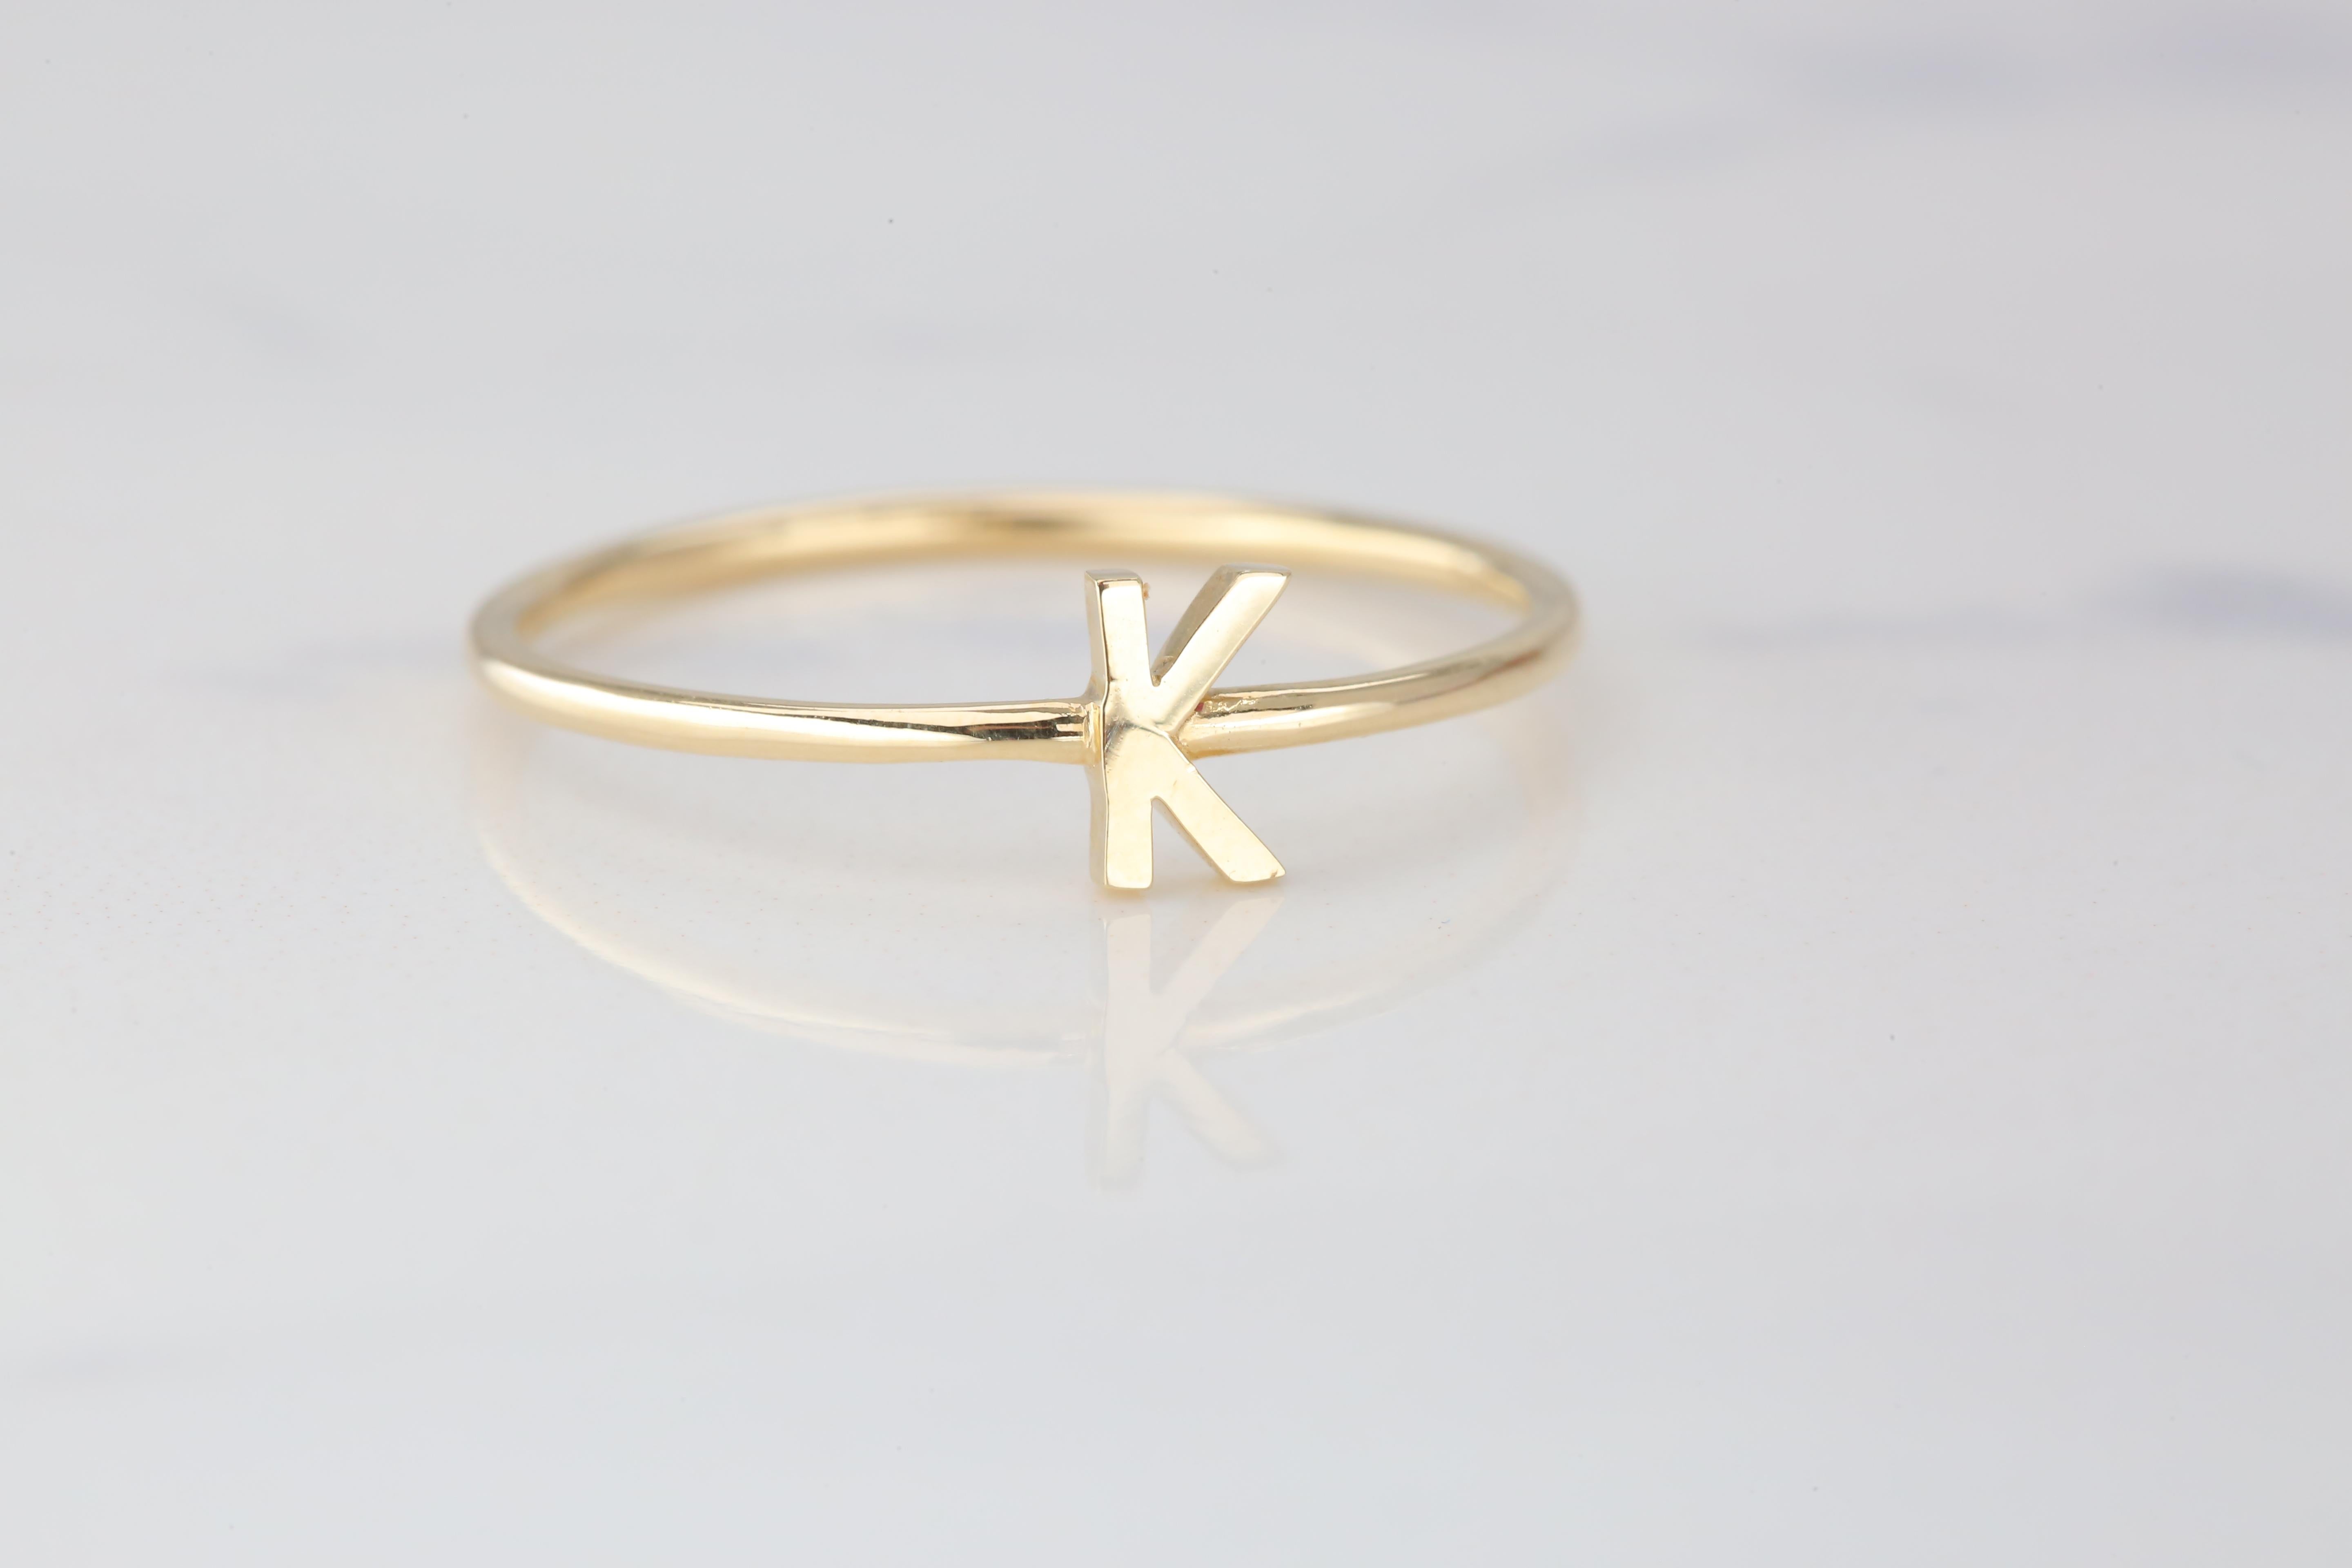 For Sale:  14K Gold Initial K Letter Ring, Personalized Initial Letter Ring 3